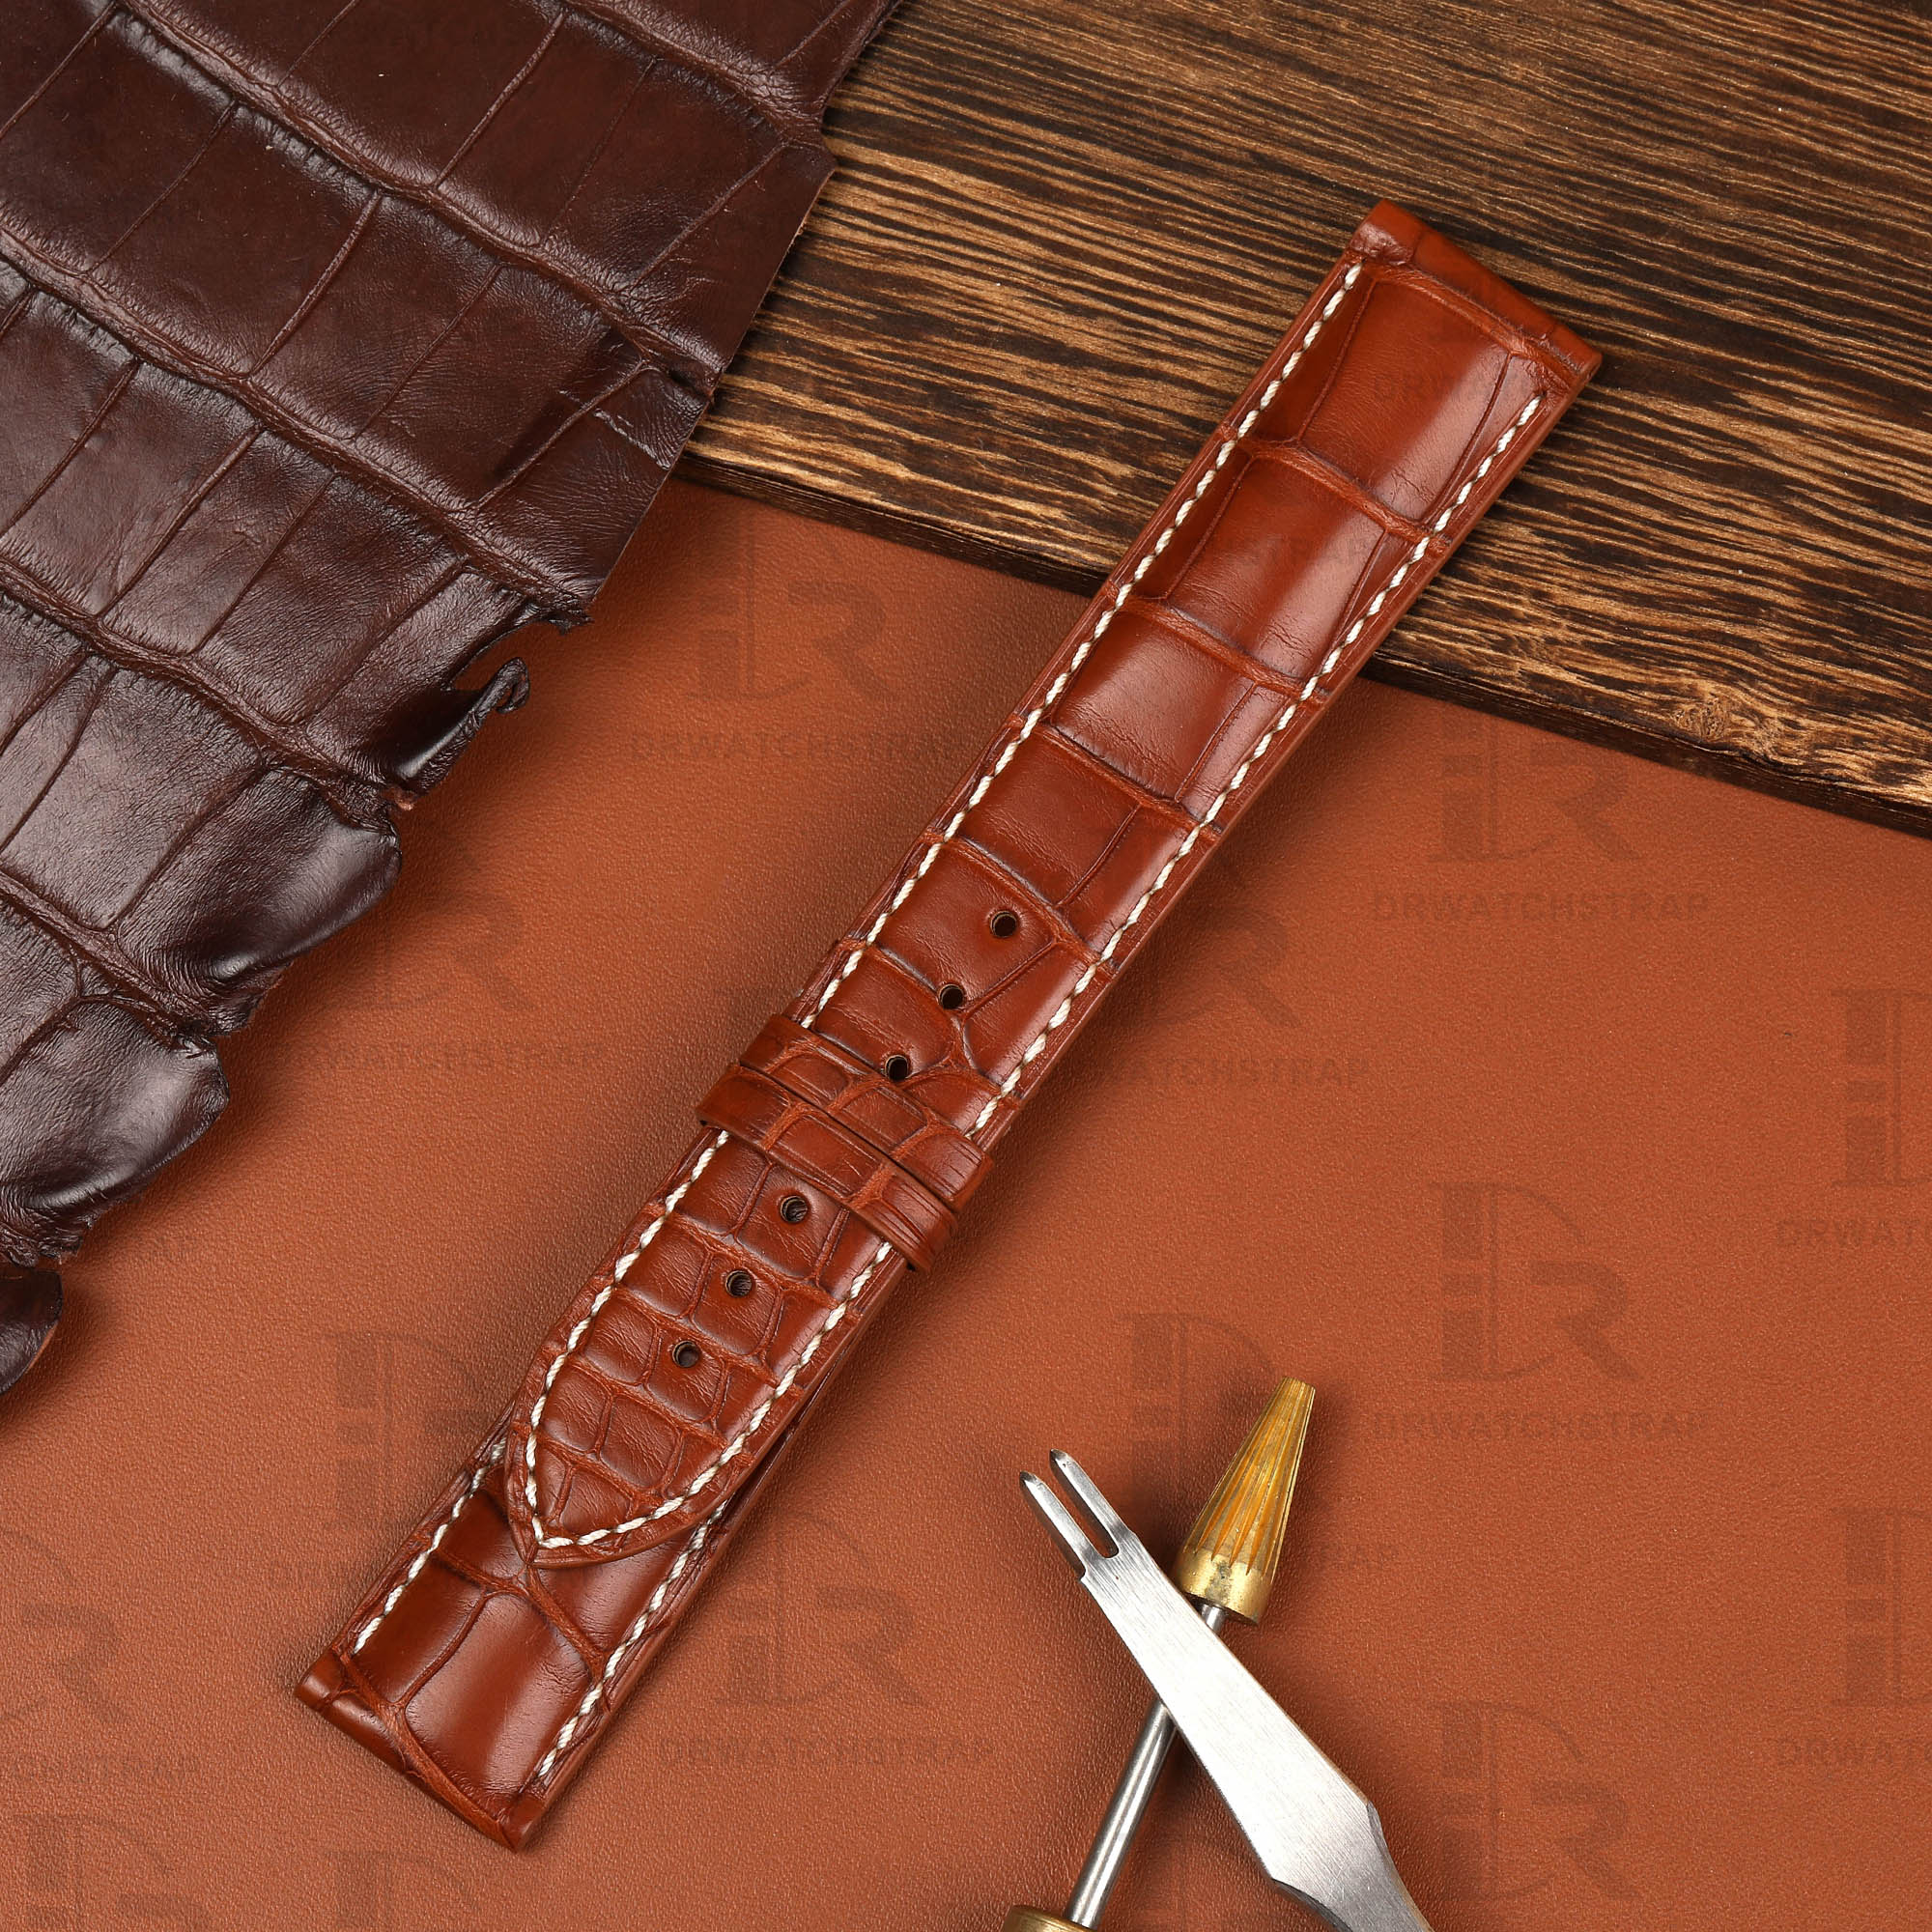 Soft and Pliable crocodile belly-scale leather material